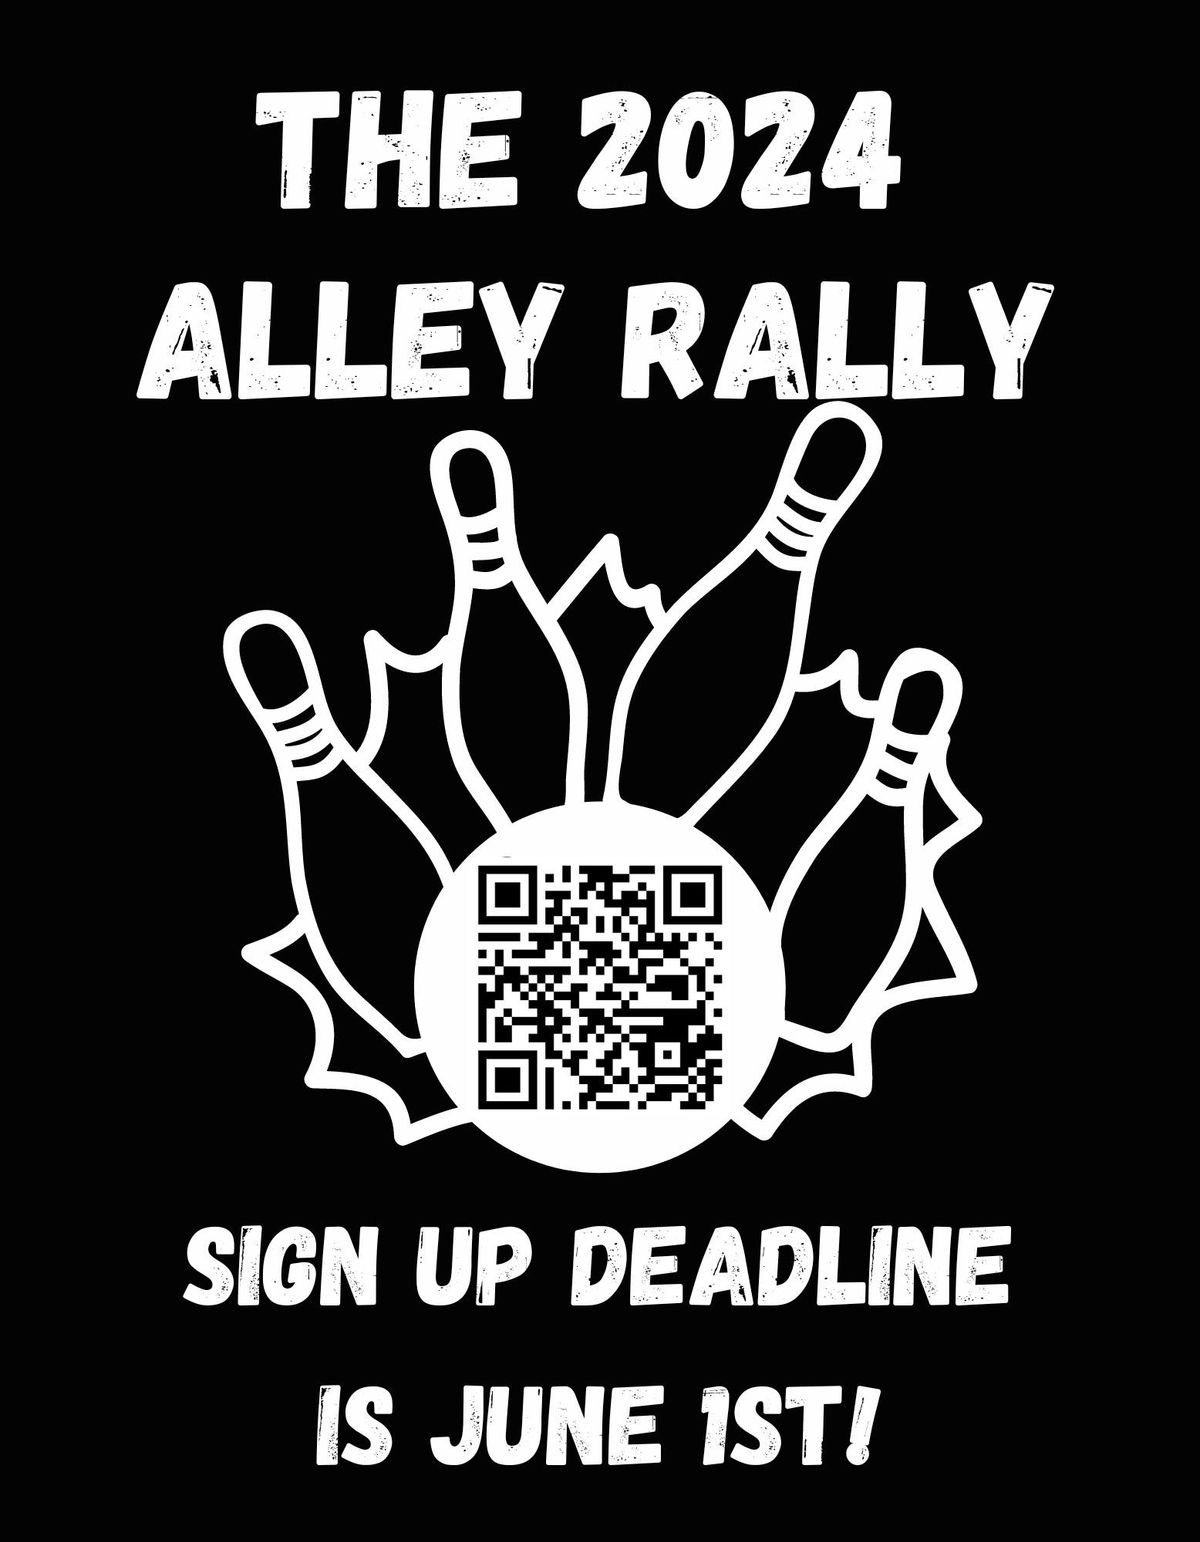 Free Clinic Alley Rally